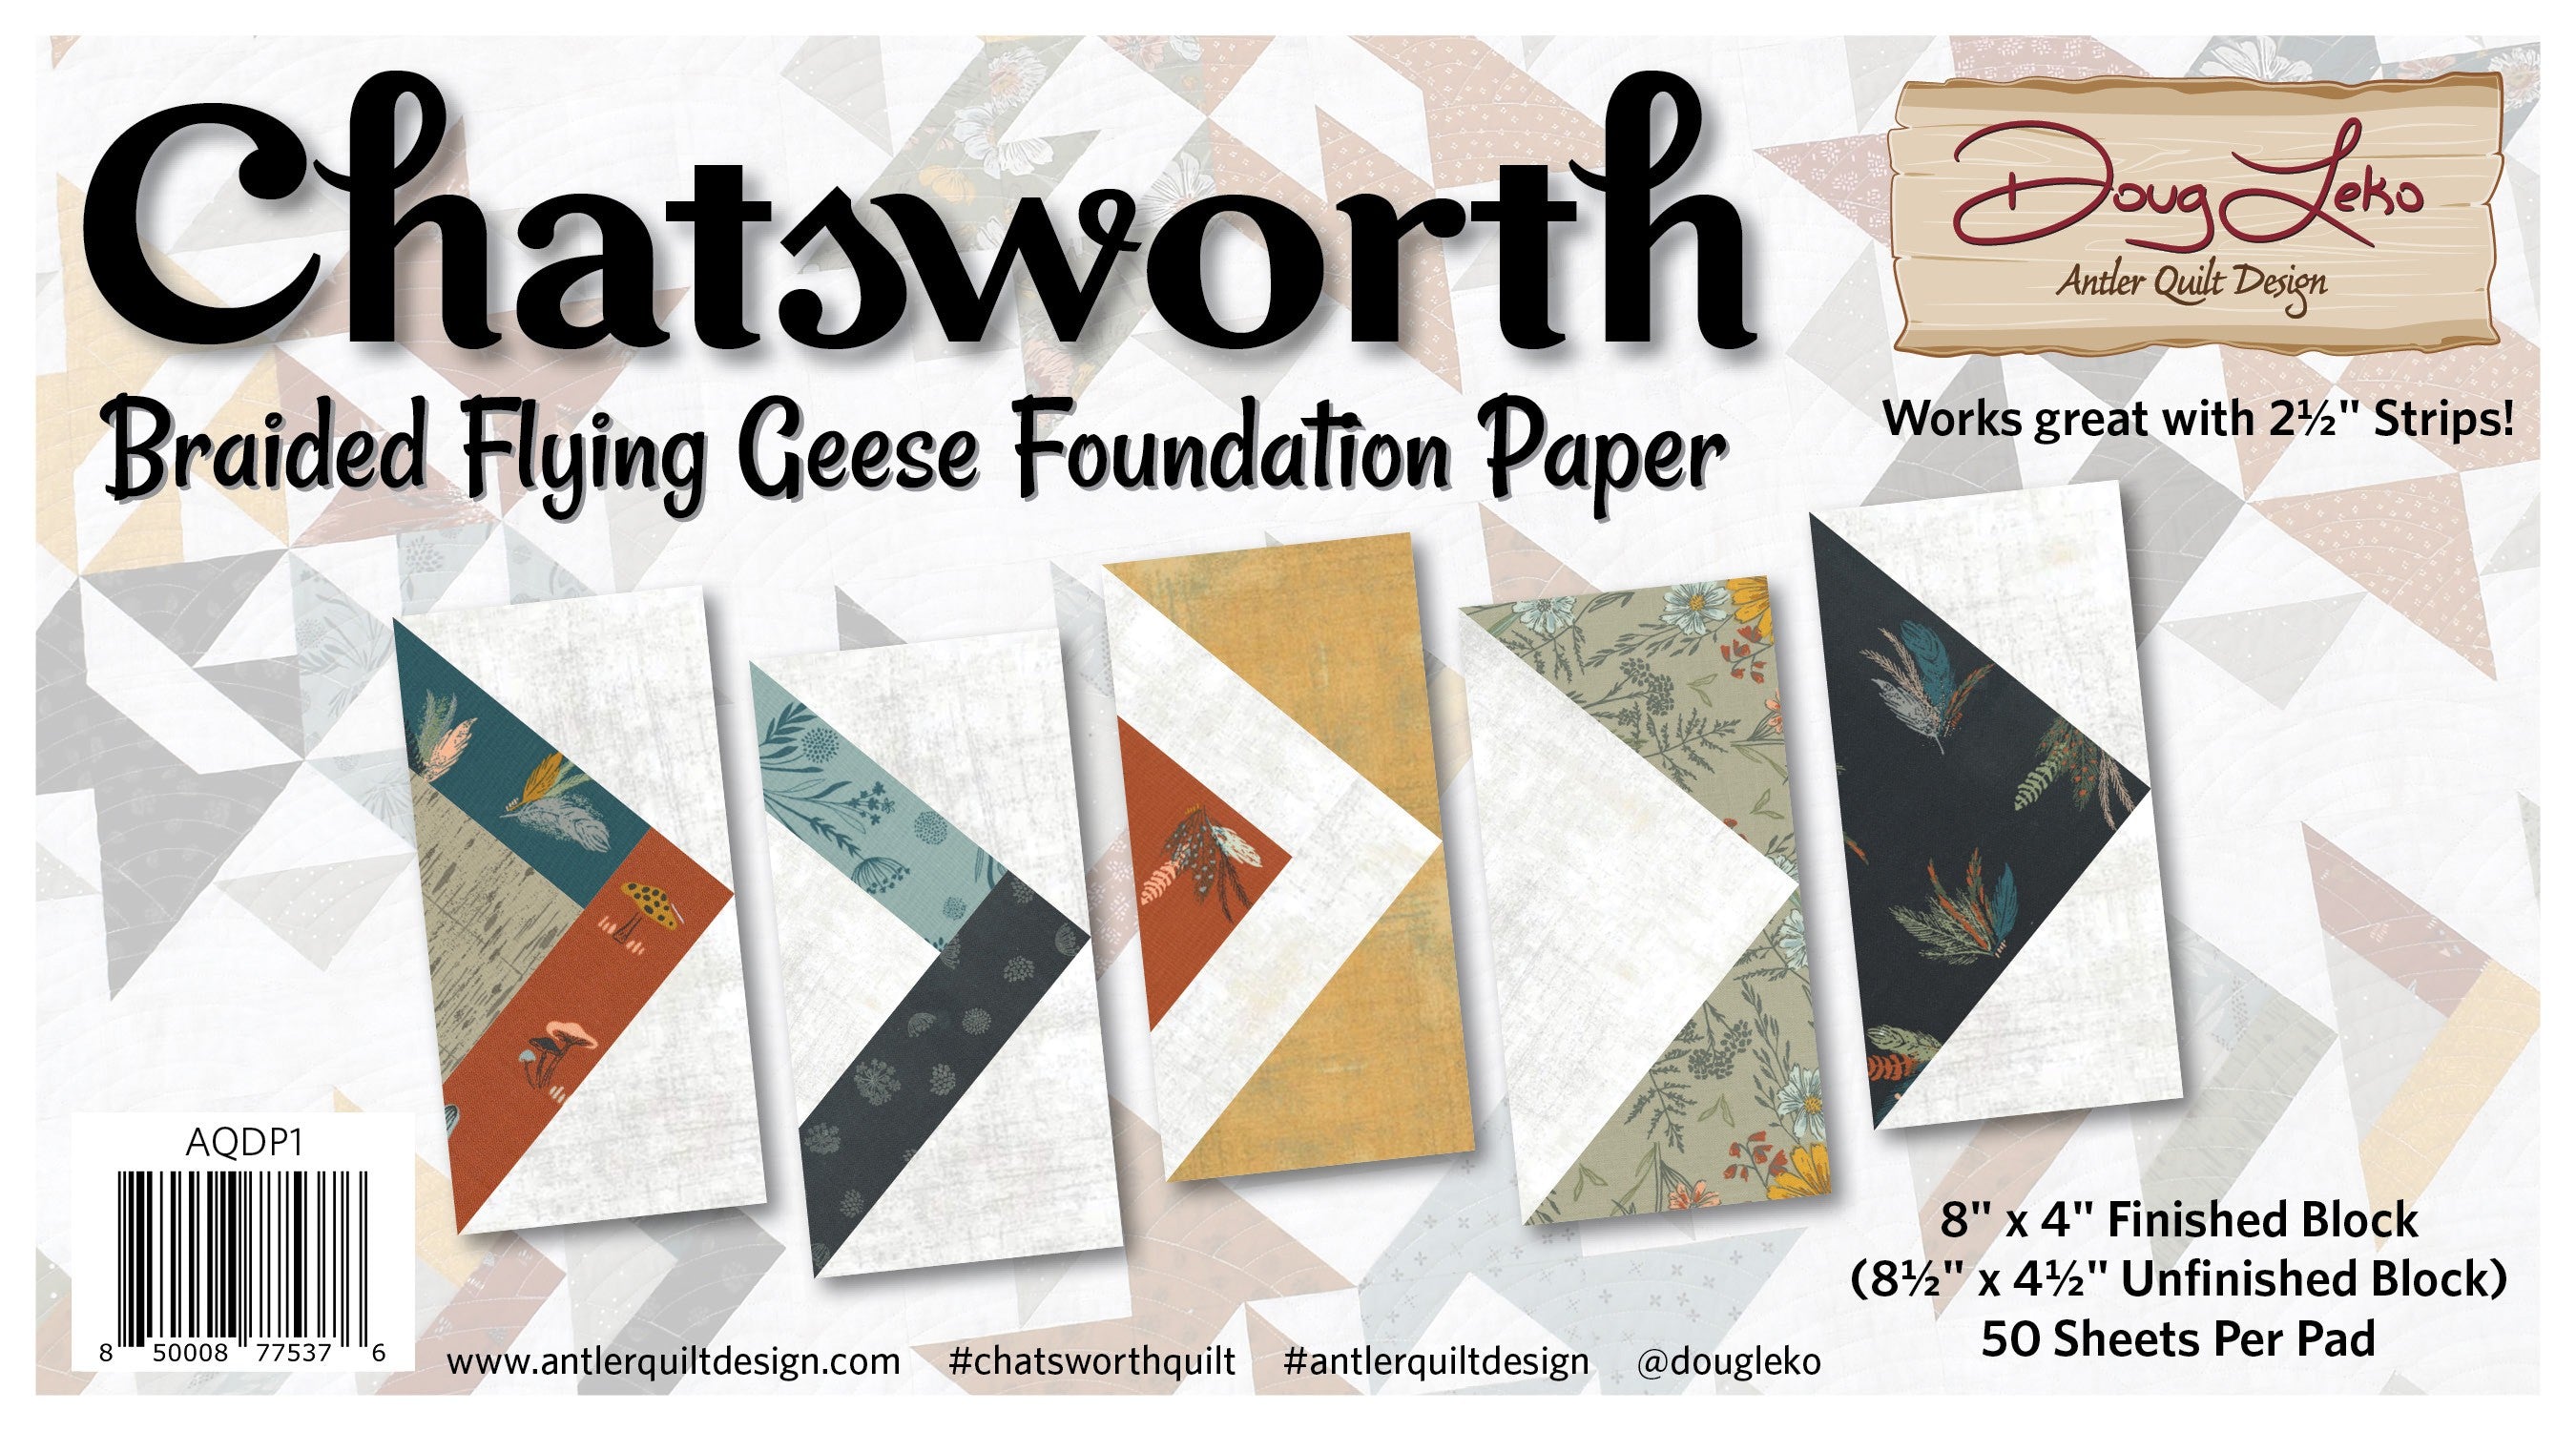 Chatsworth Braided Flying Geese Foundation Paper by Doug Leko for Antler Quilt Designs